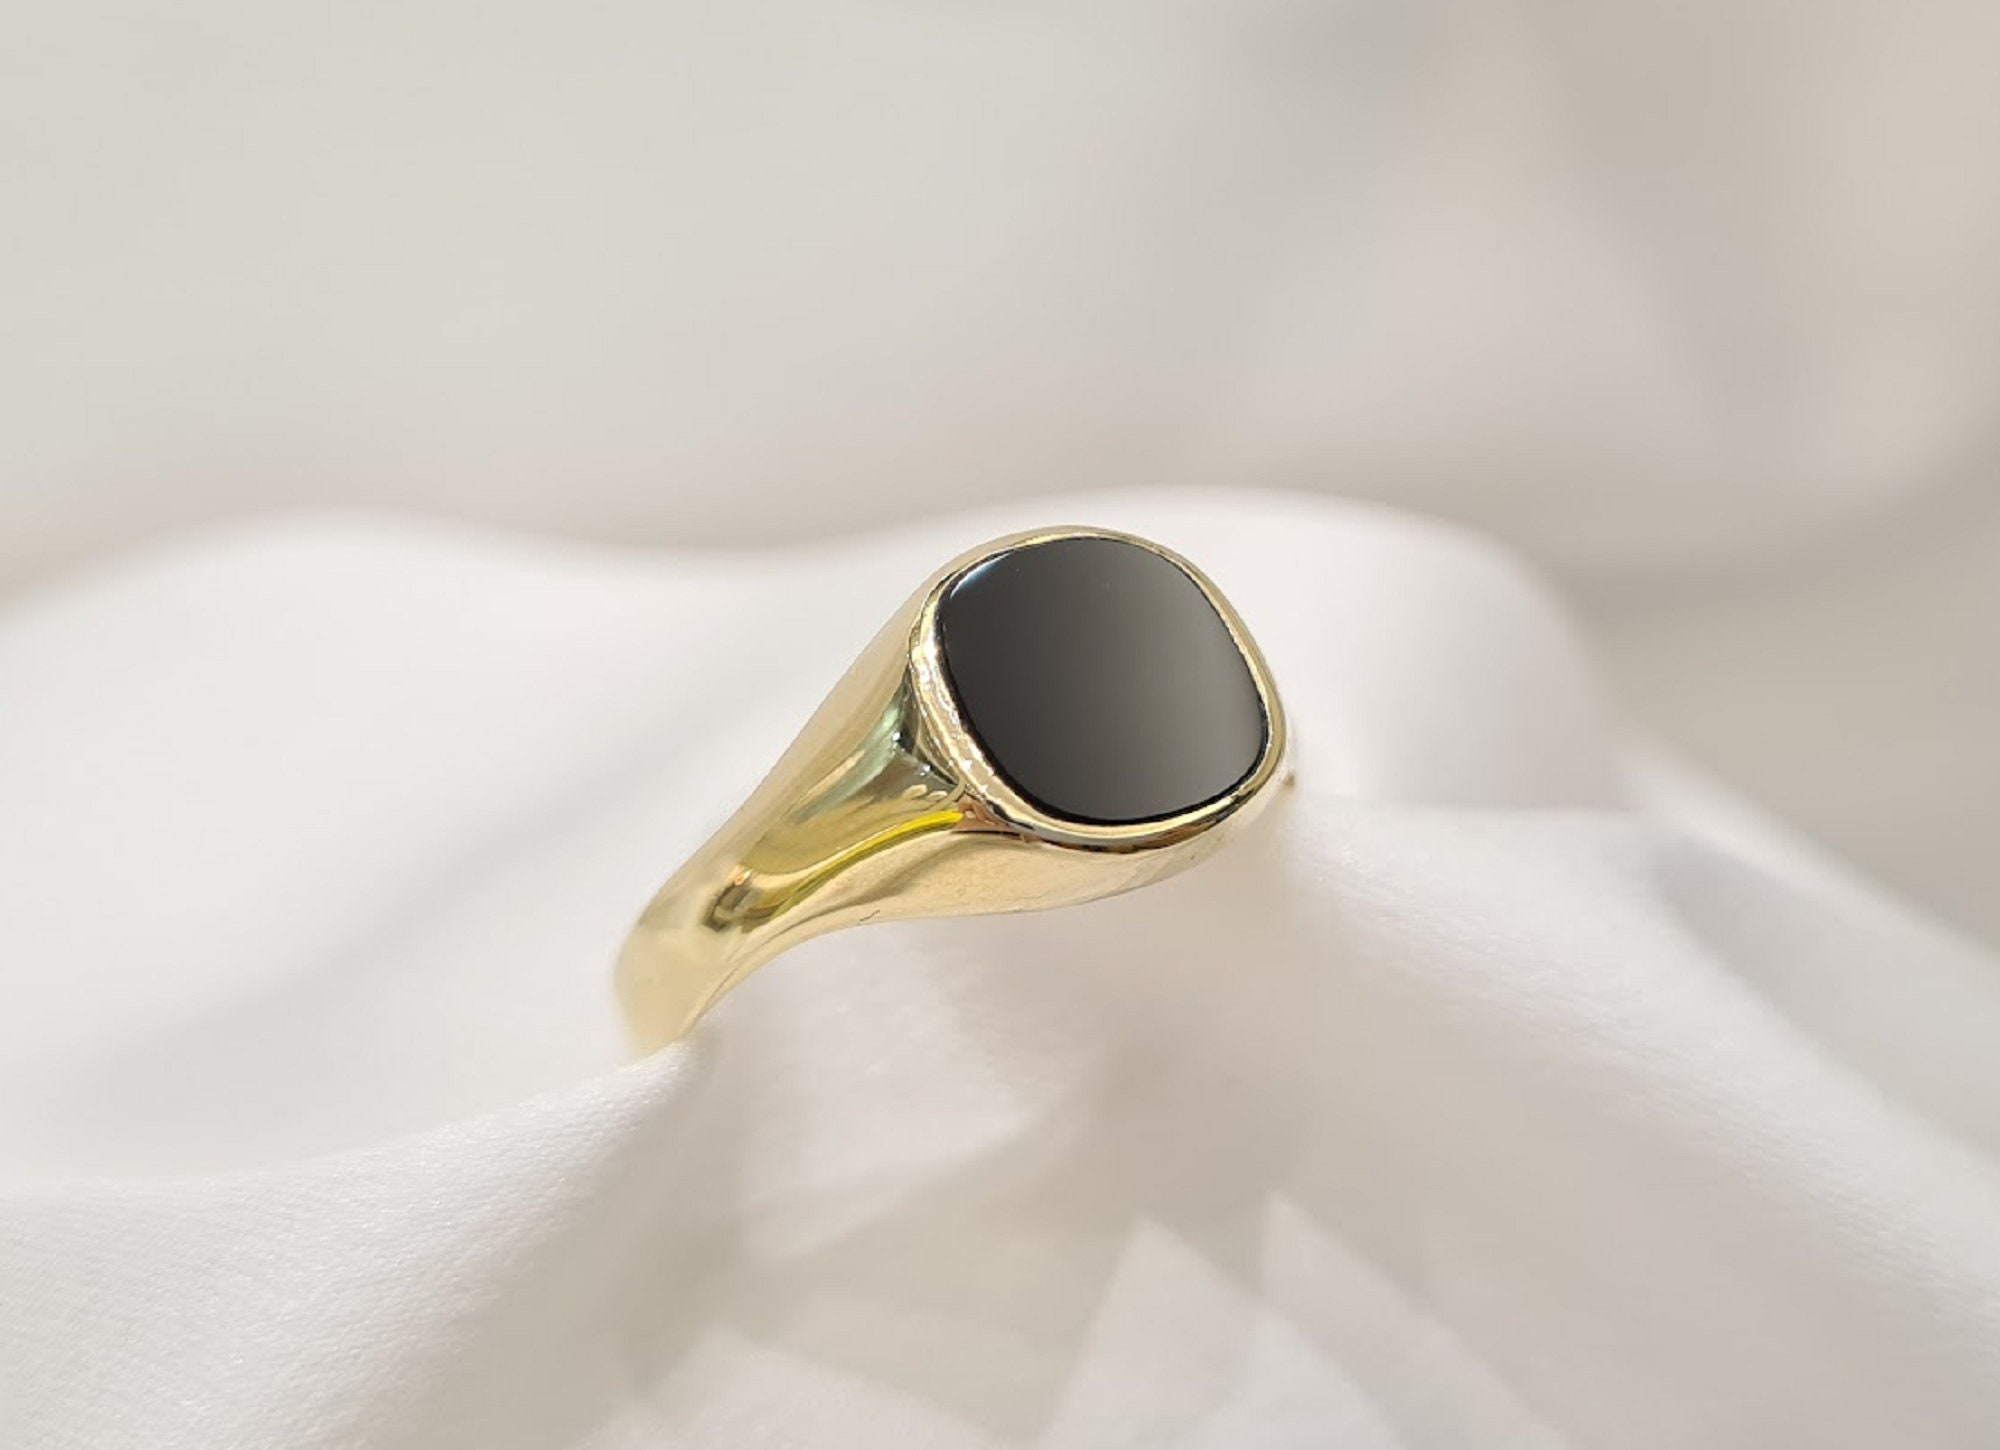 Jewelry Etsy Signet Gift Gold Pinky Handmade Ring Black Graduation Onyx Yellow Mens Finger 14K Gold Sweden Unisex Gift Ring Ring Fathers Day -